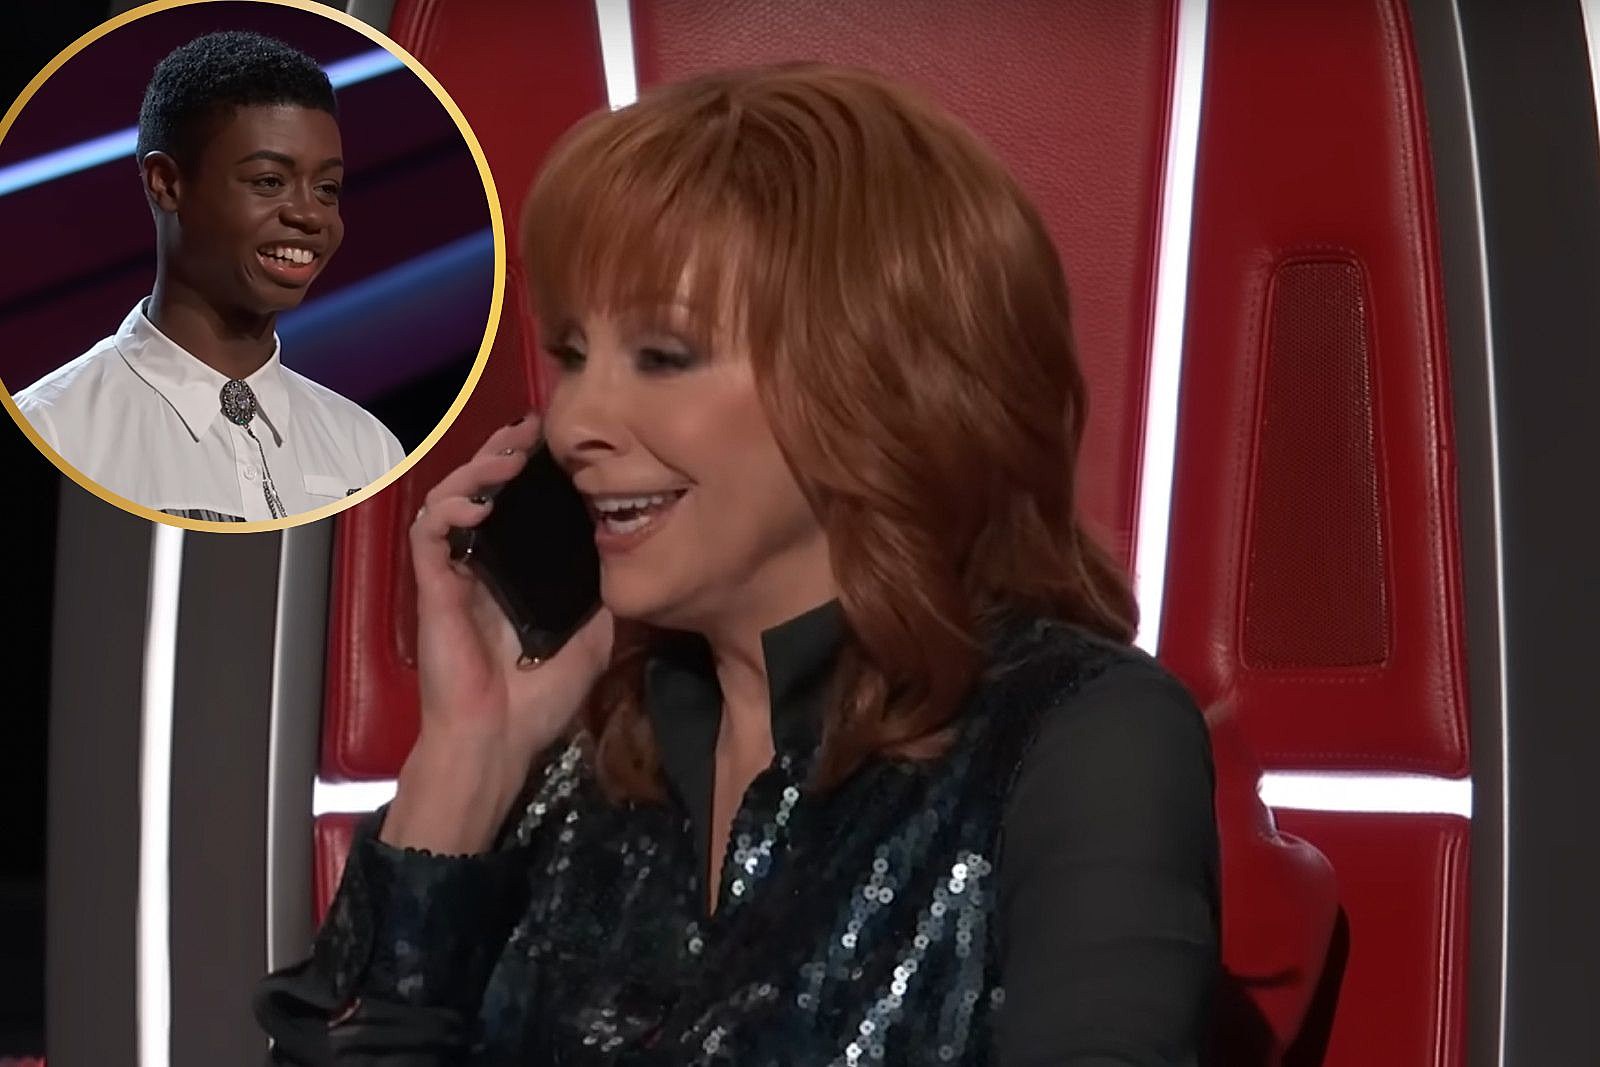 Reba McEntire Fakes a Call to Keith Urban on ‘The Voice’ 